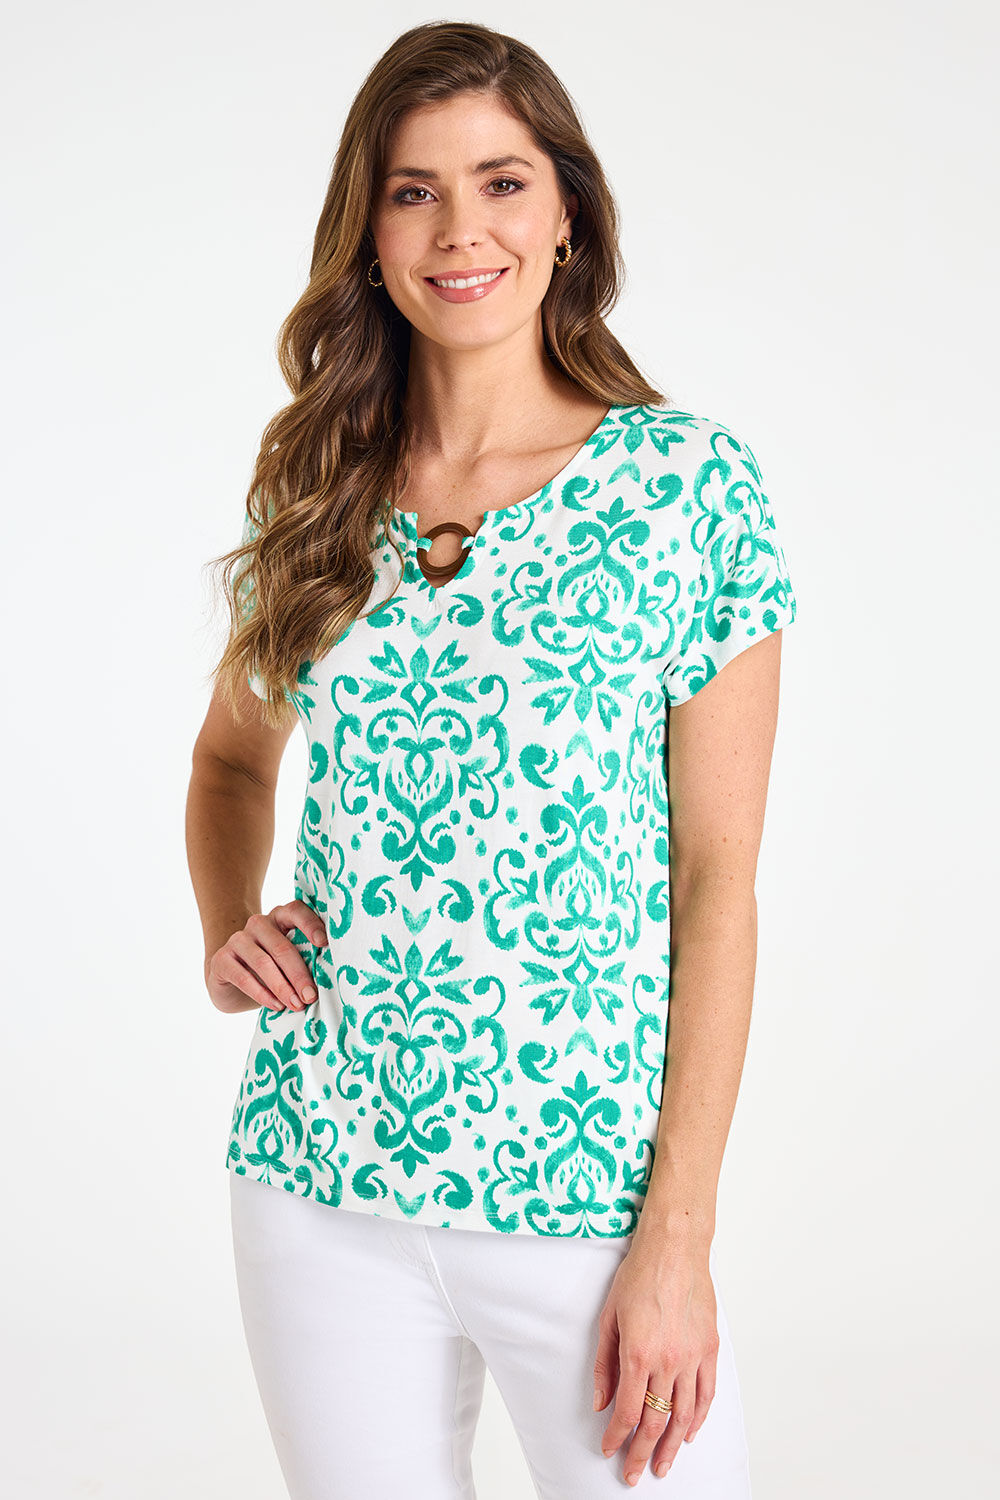 Bonmarche Green Short Sleeve Watercolour Print Top With Ring Detail, Size: 28